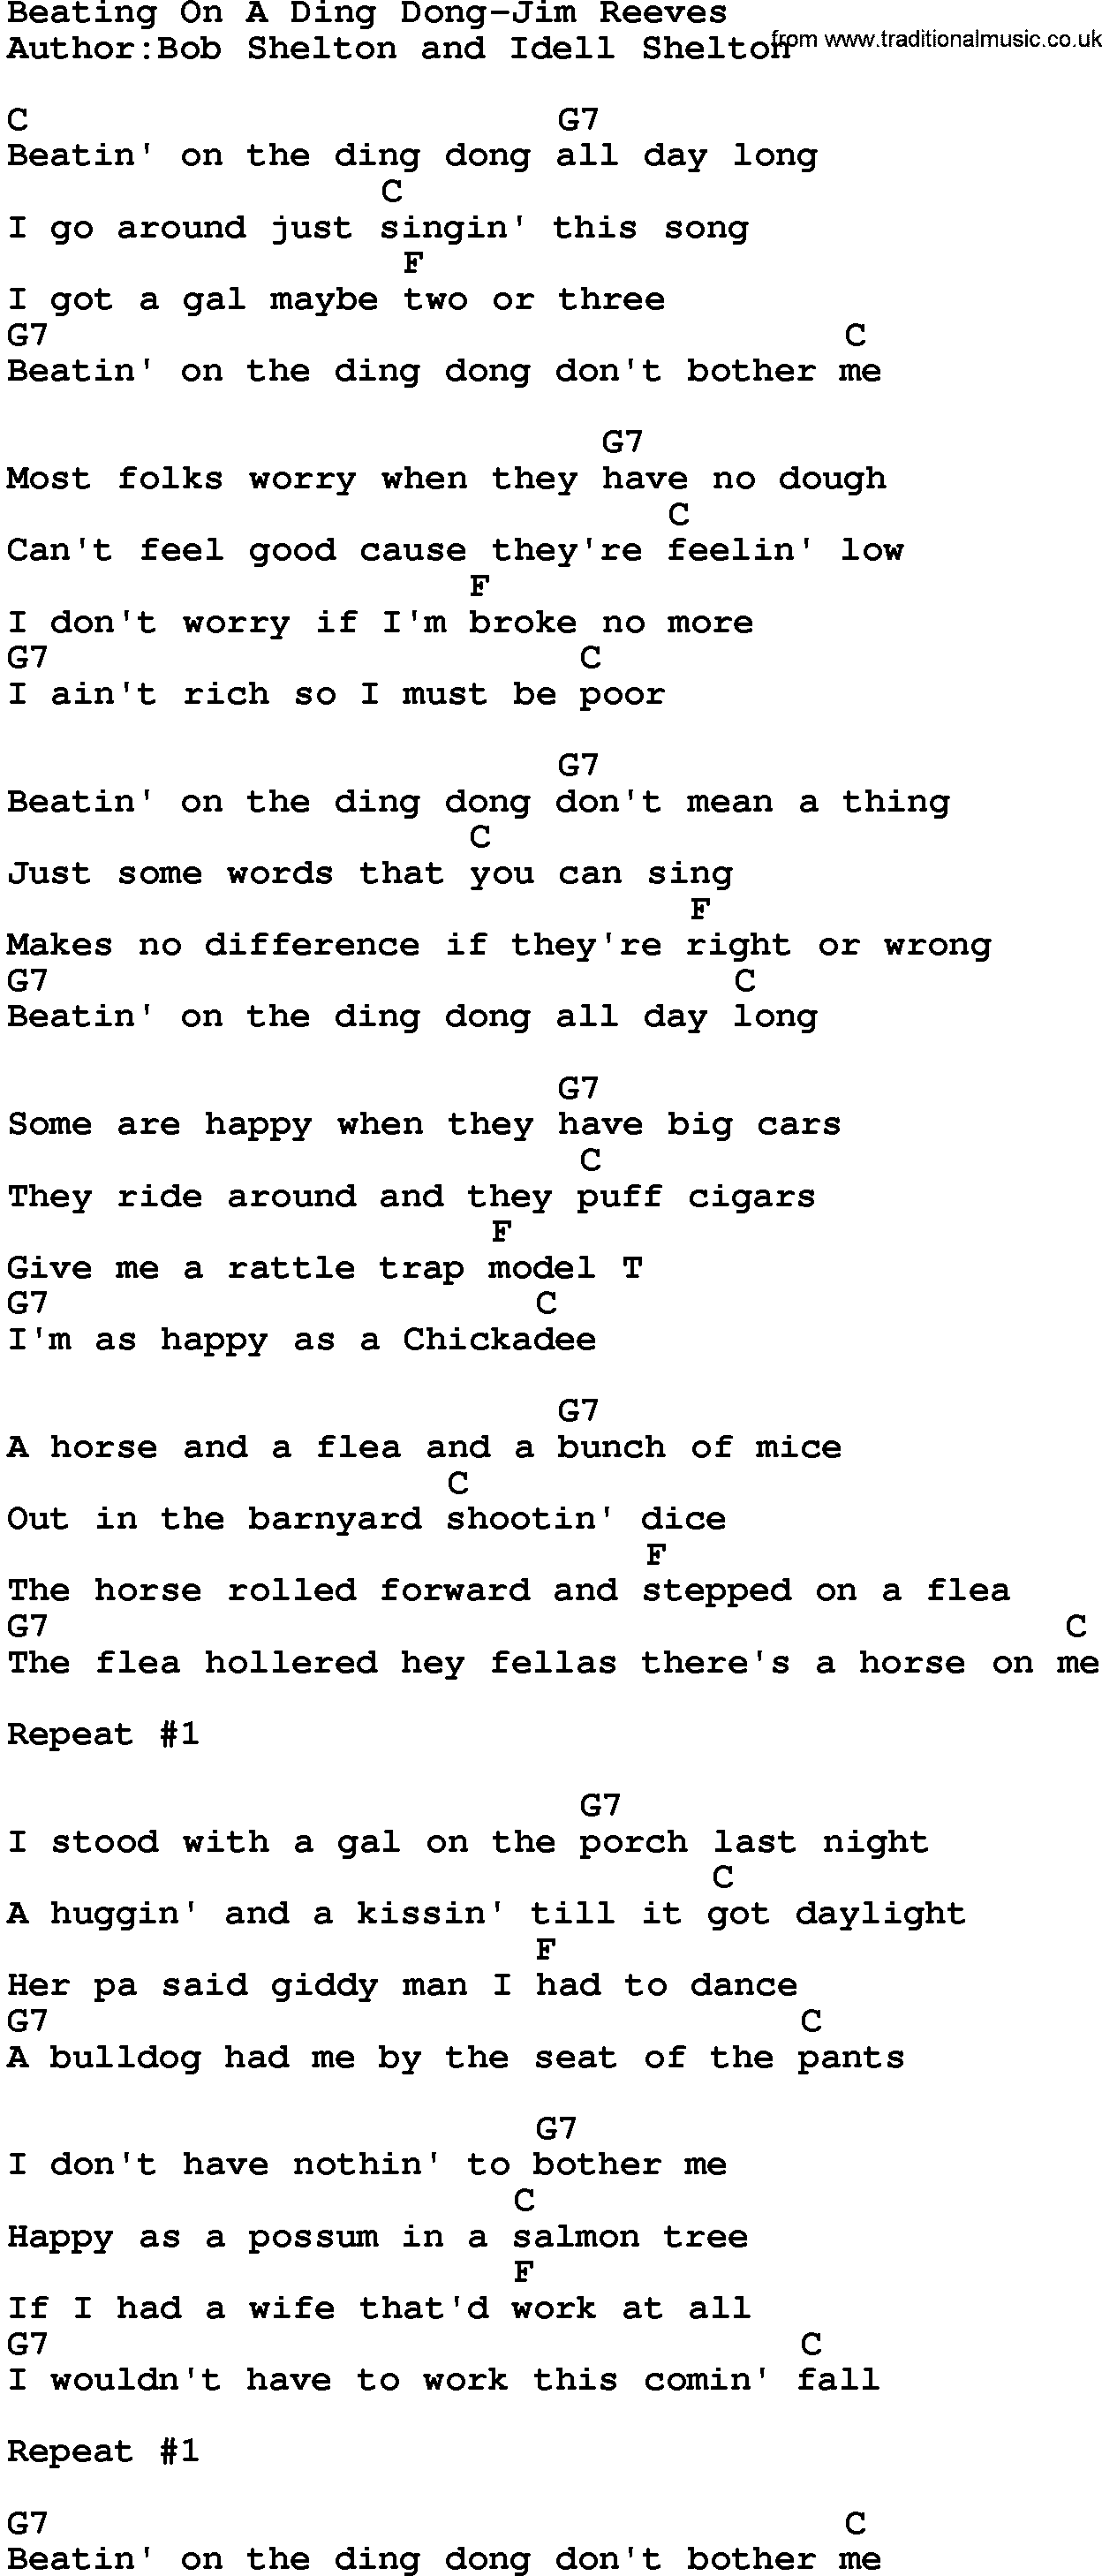 Country music song: Beating On A Ding Dong-Jim Reeves lyrics and chords